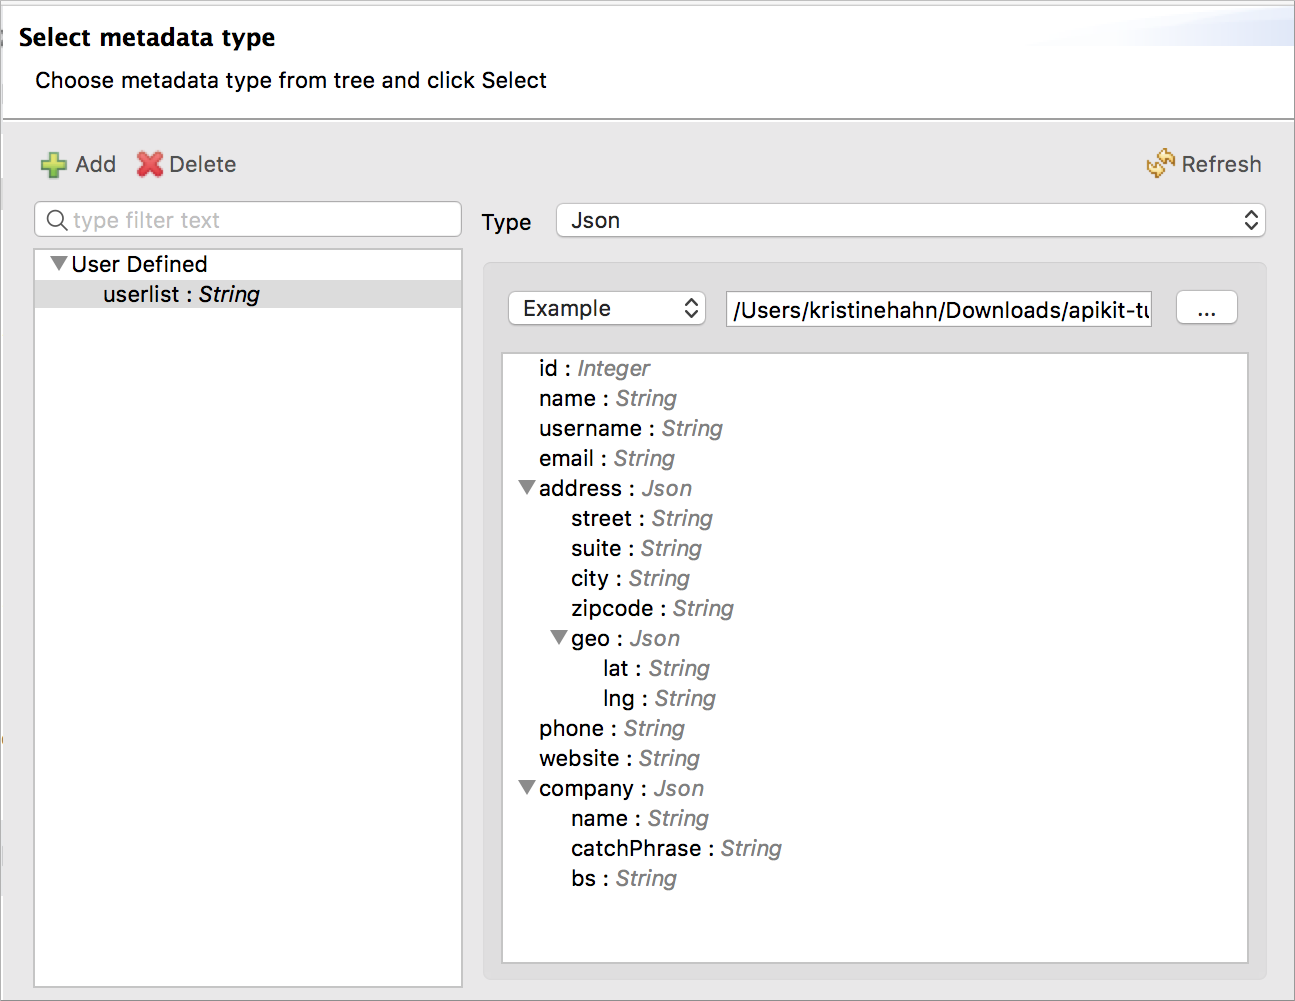 *userlist* example in the *Select metadata type* dialog.